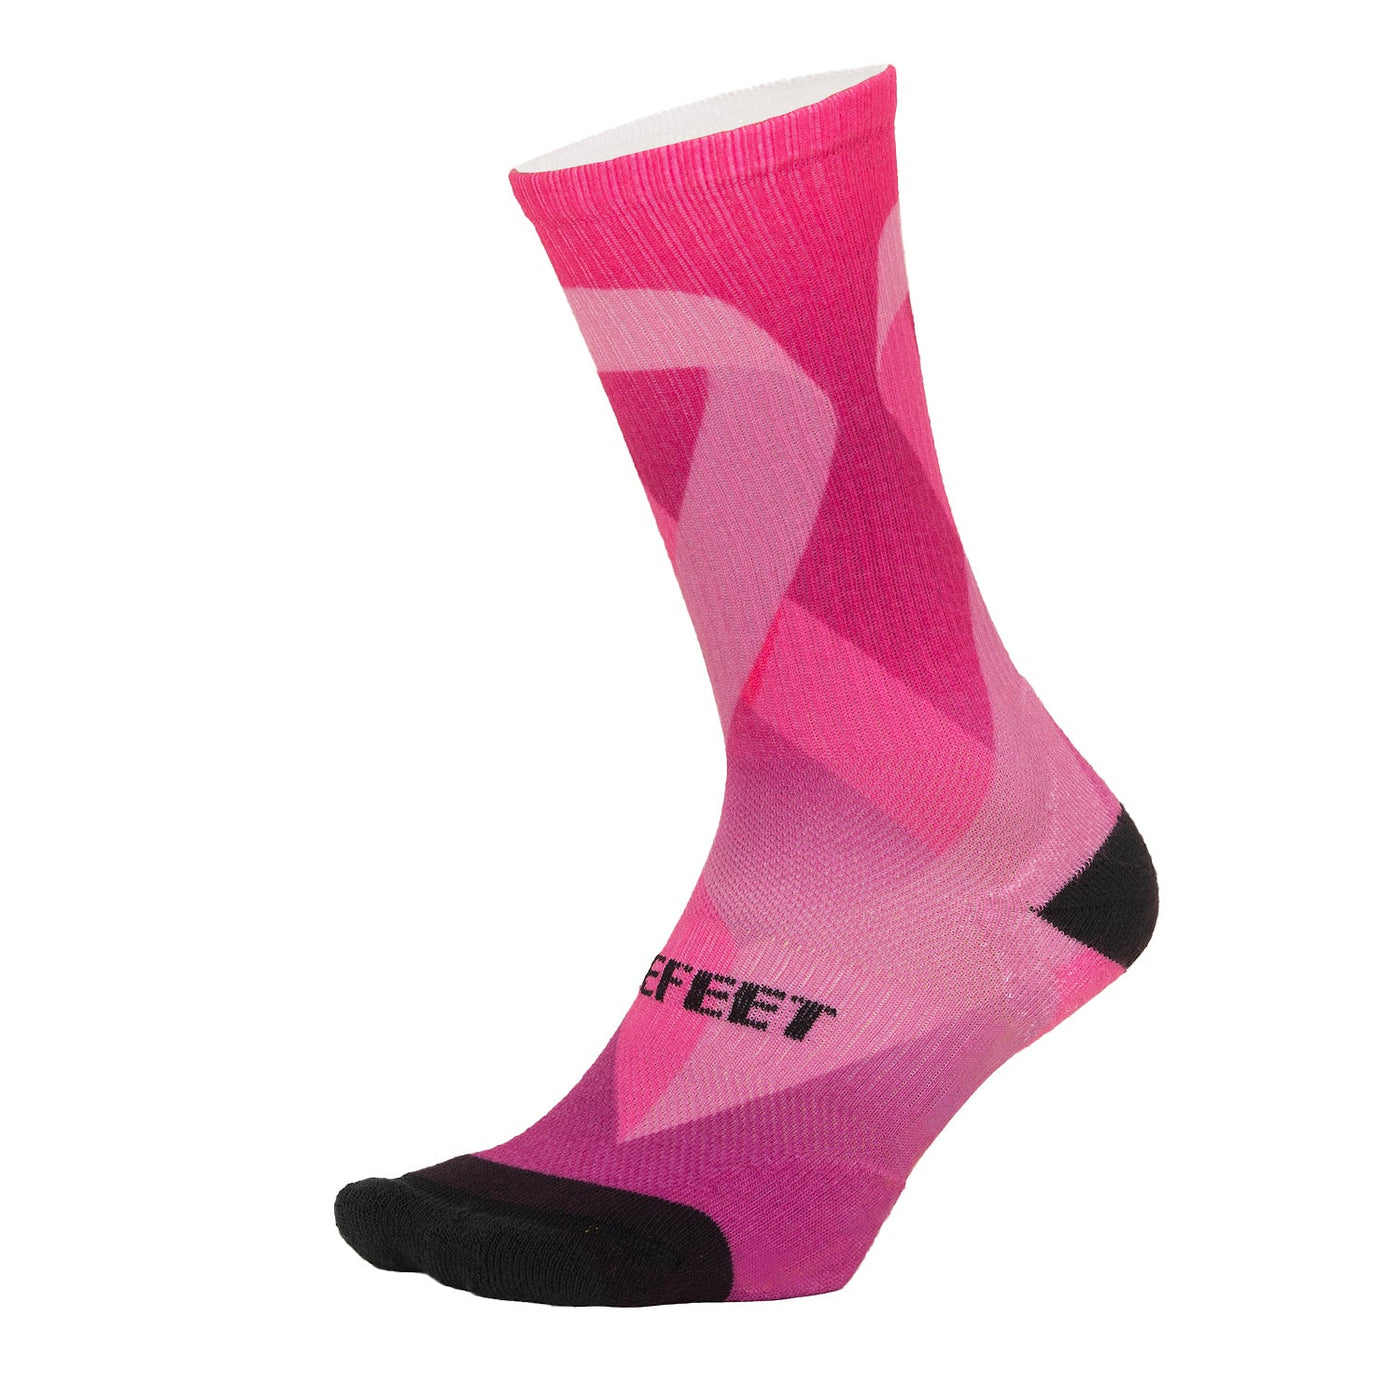 Sub360 All Day Breast Cancer Awareness - DeFeet